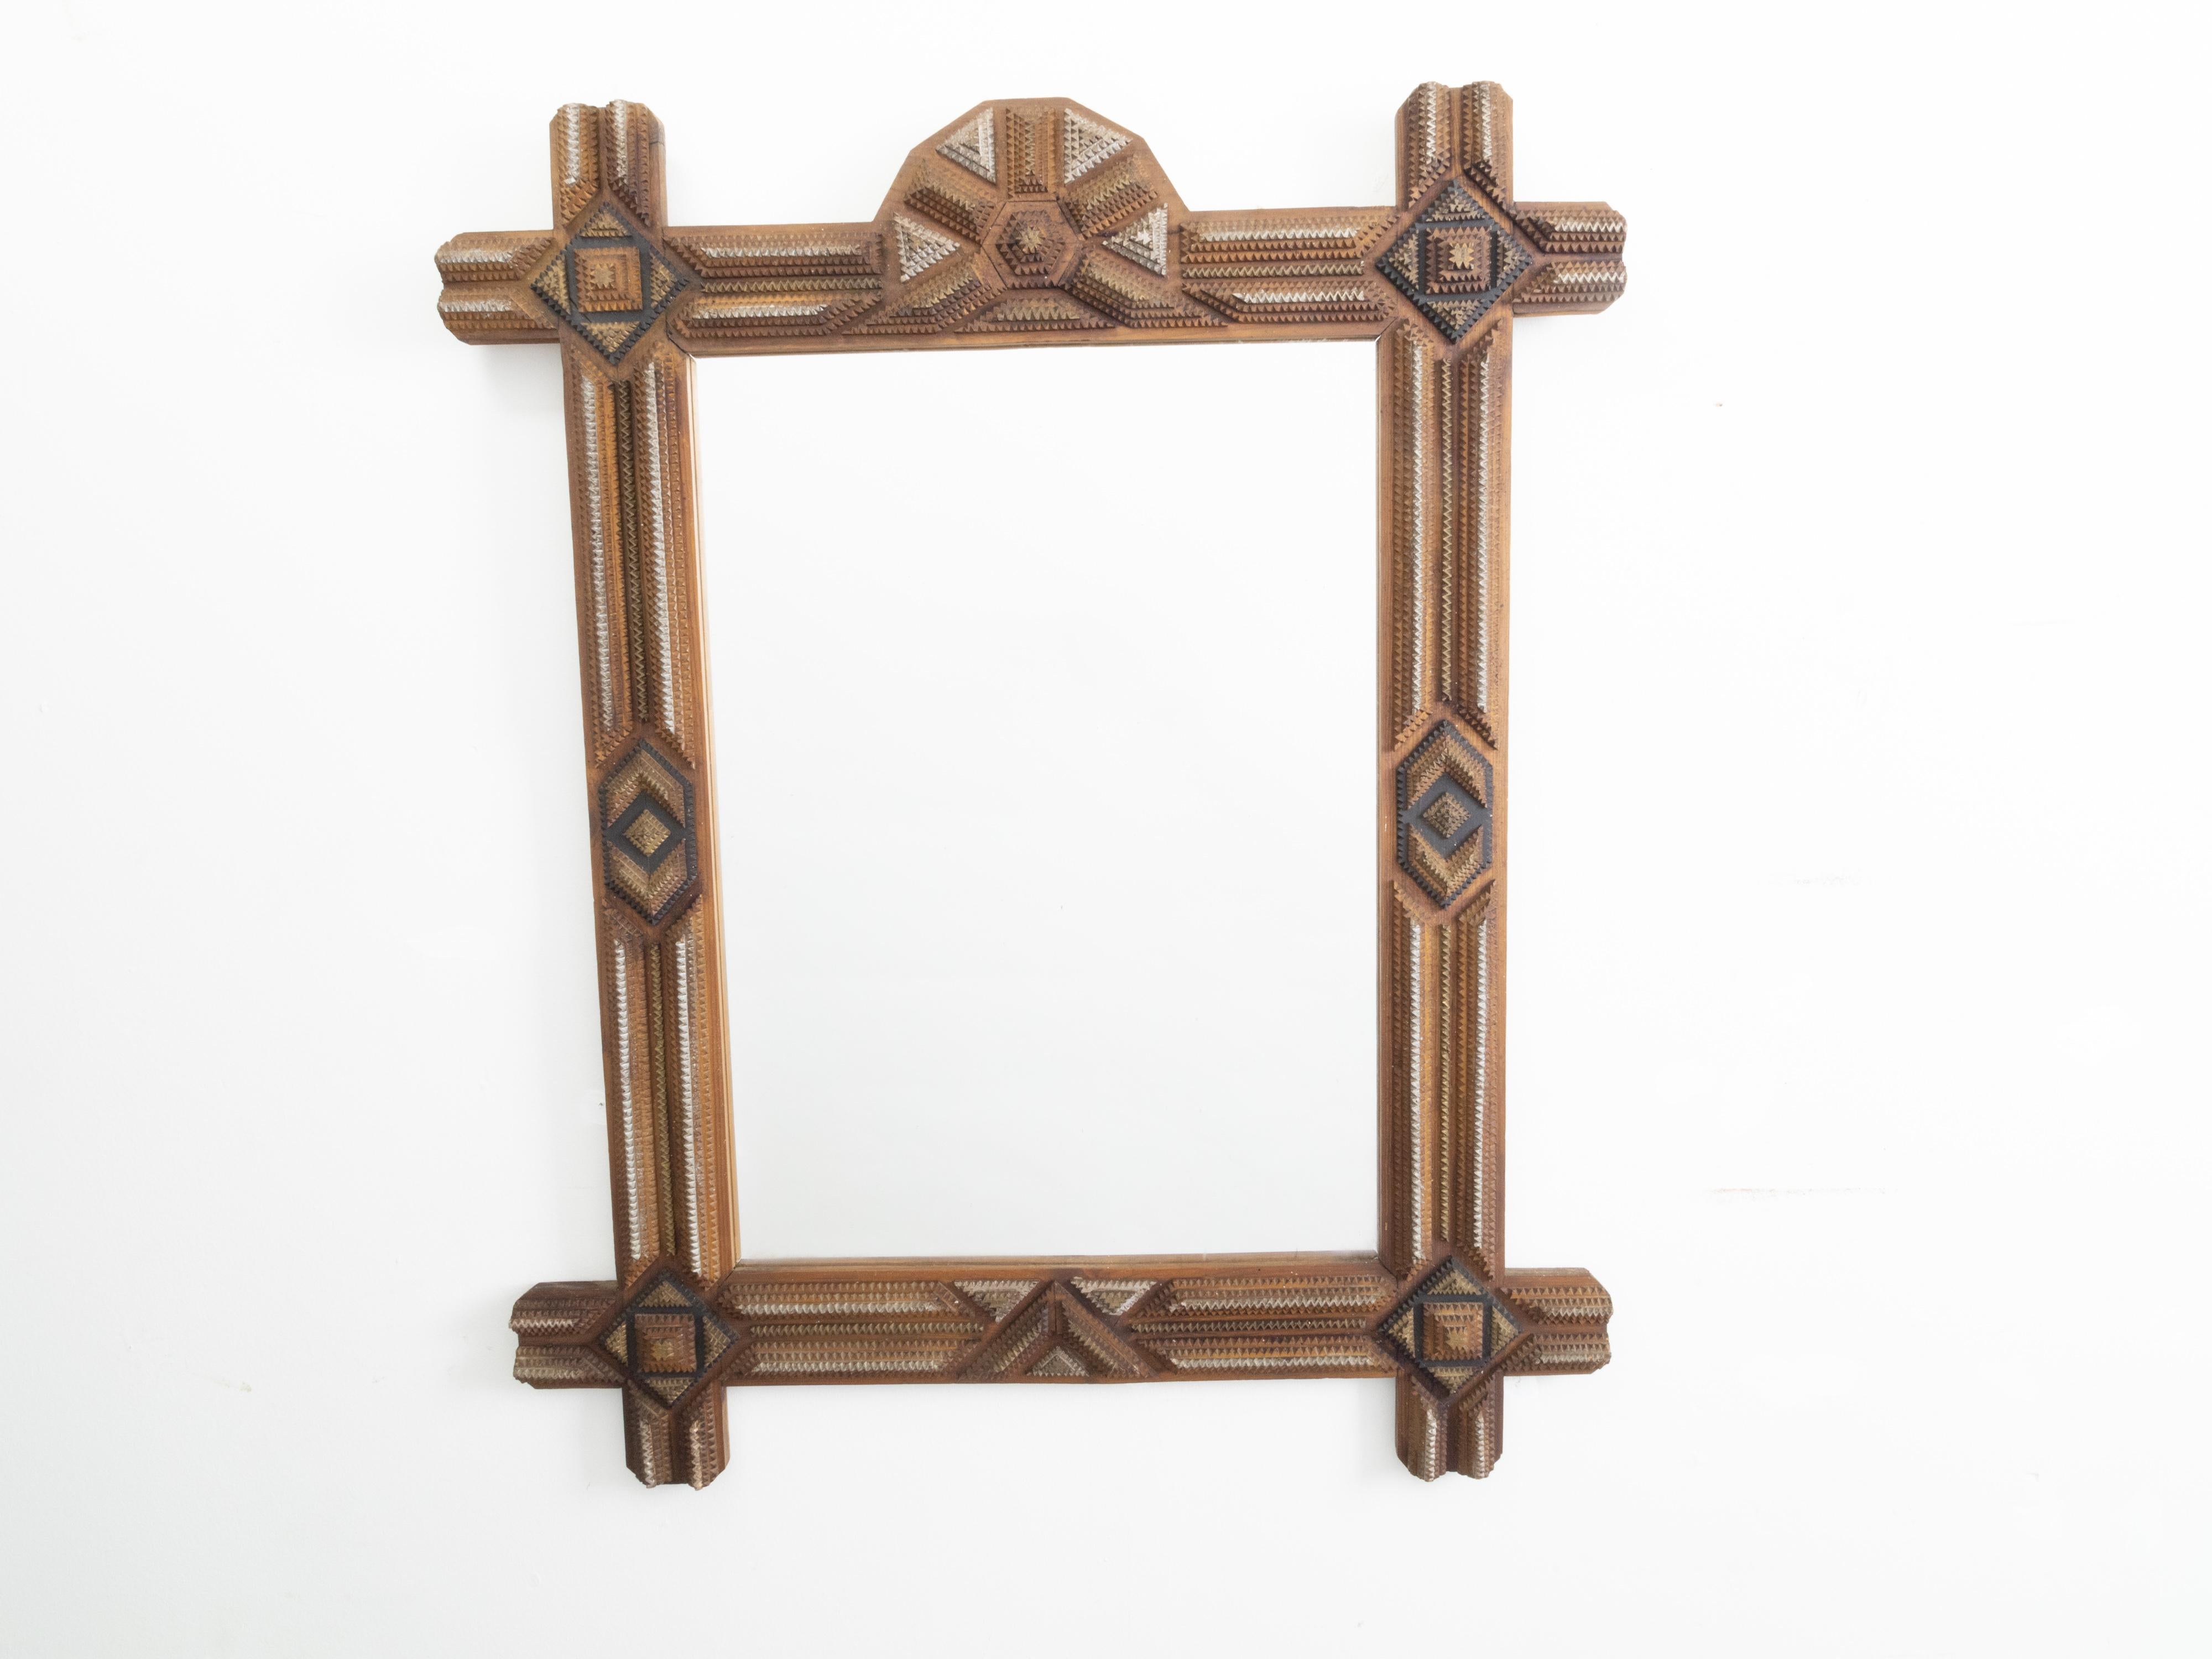 Folk Art French 1900s Carved Tramp Art Mirror with Geometric Motifs and Painted Accents